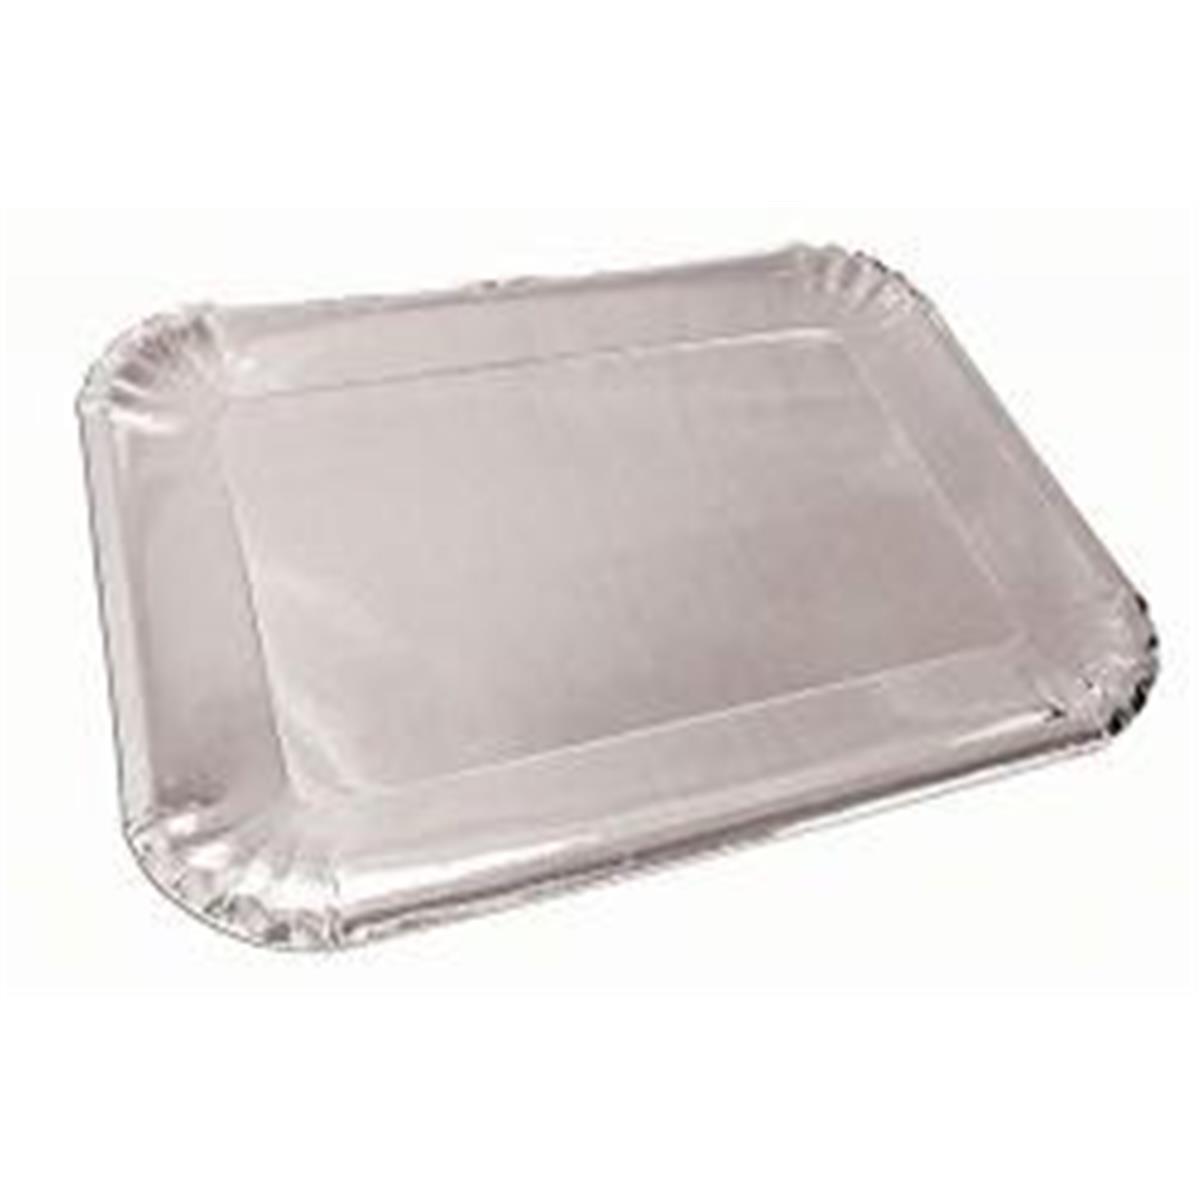 Picture of Forum Novelties 309737 Silver Paper Platters - 6 Count